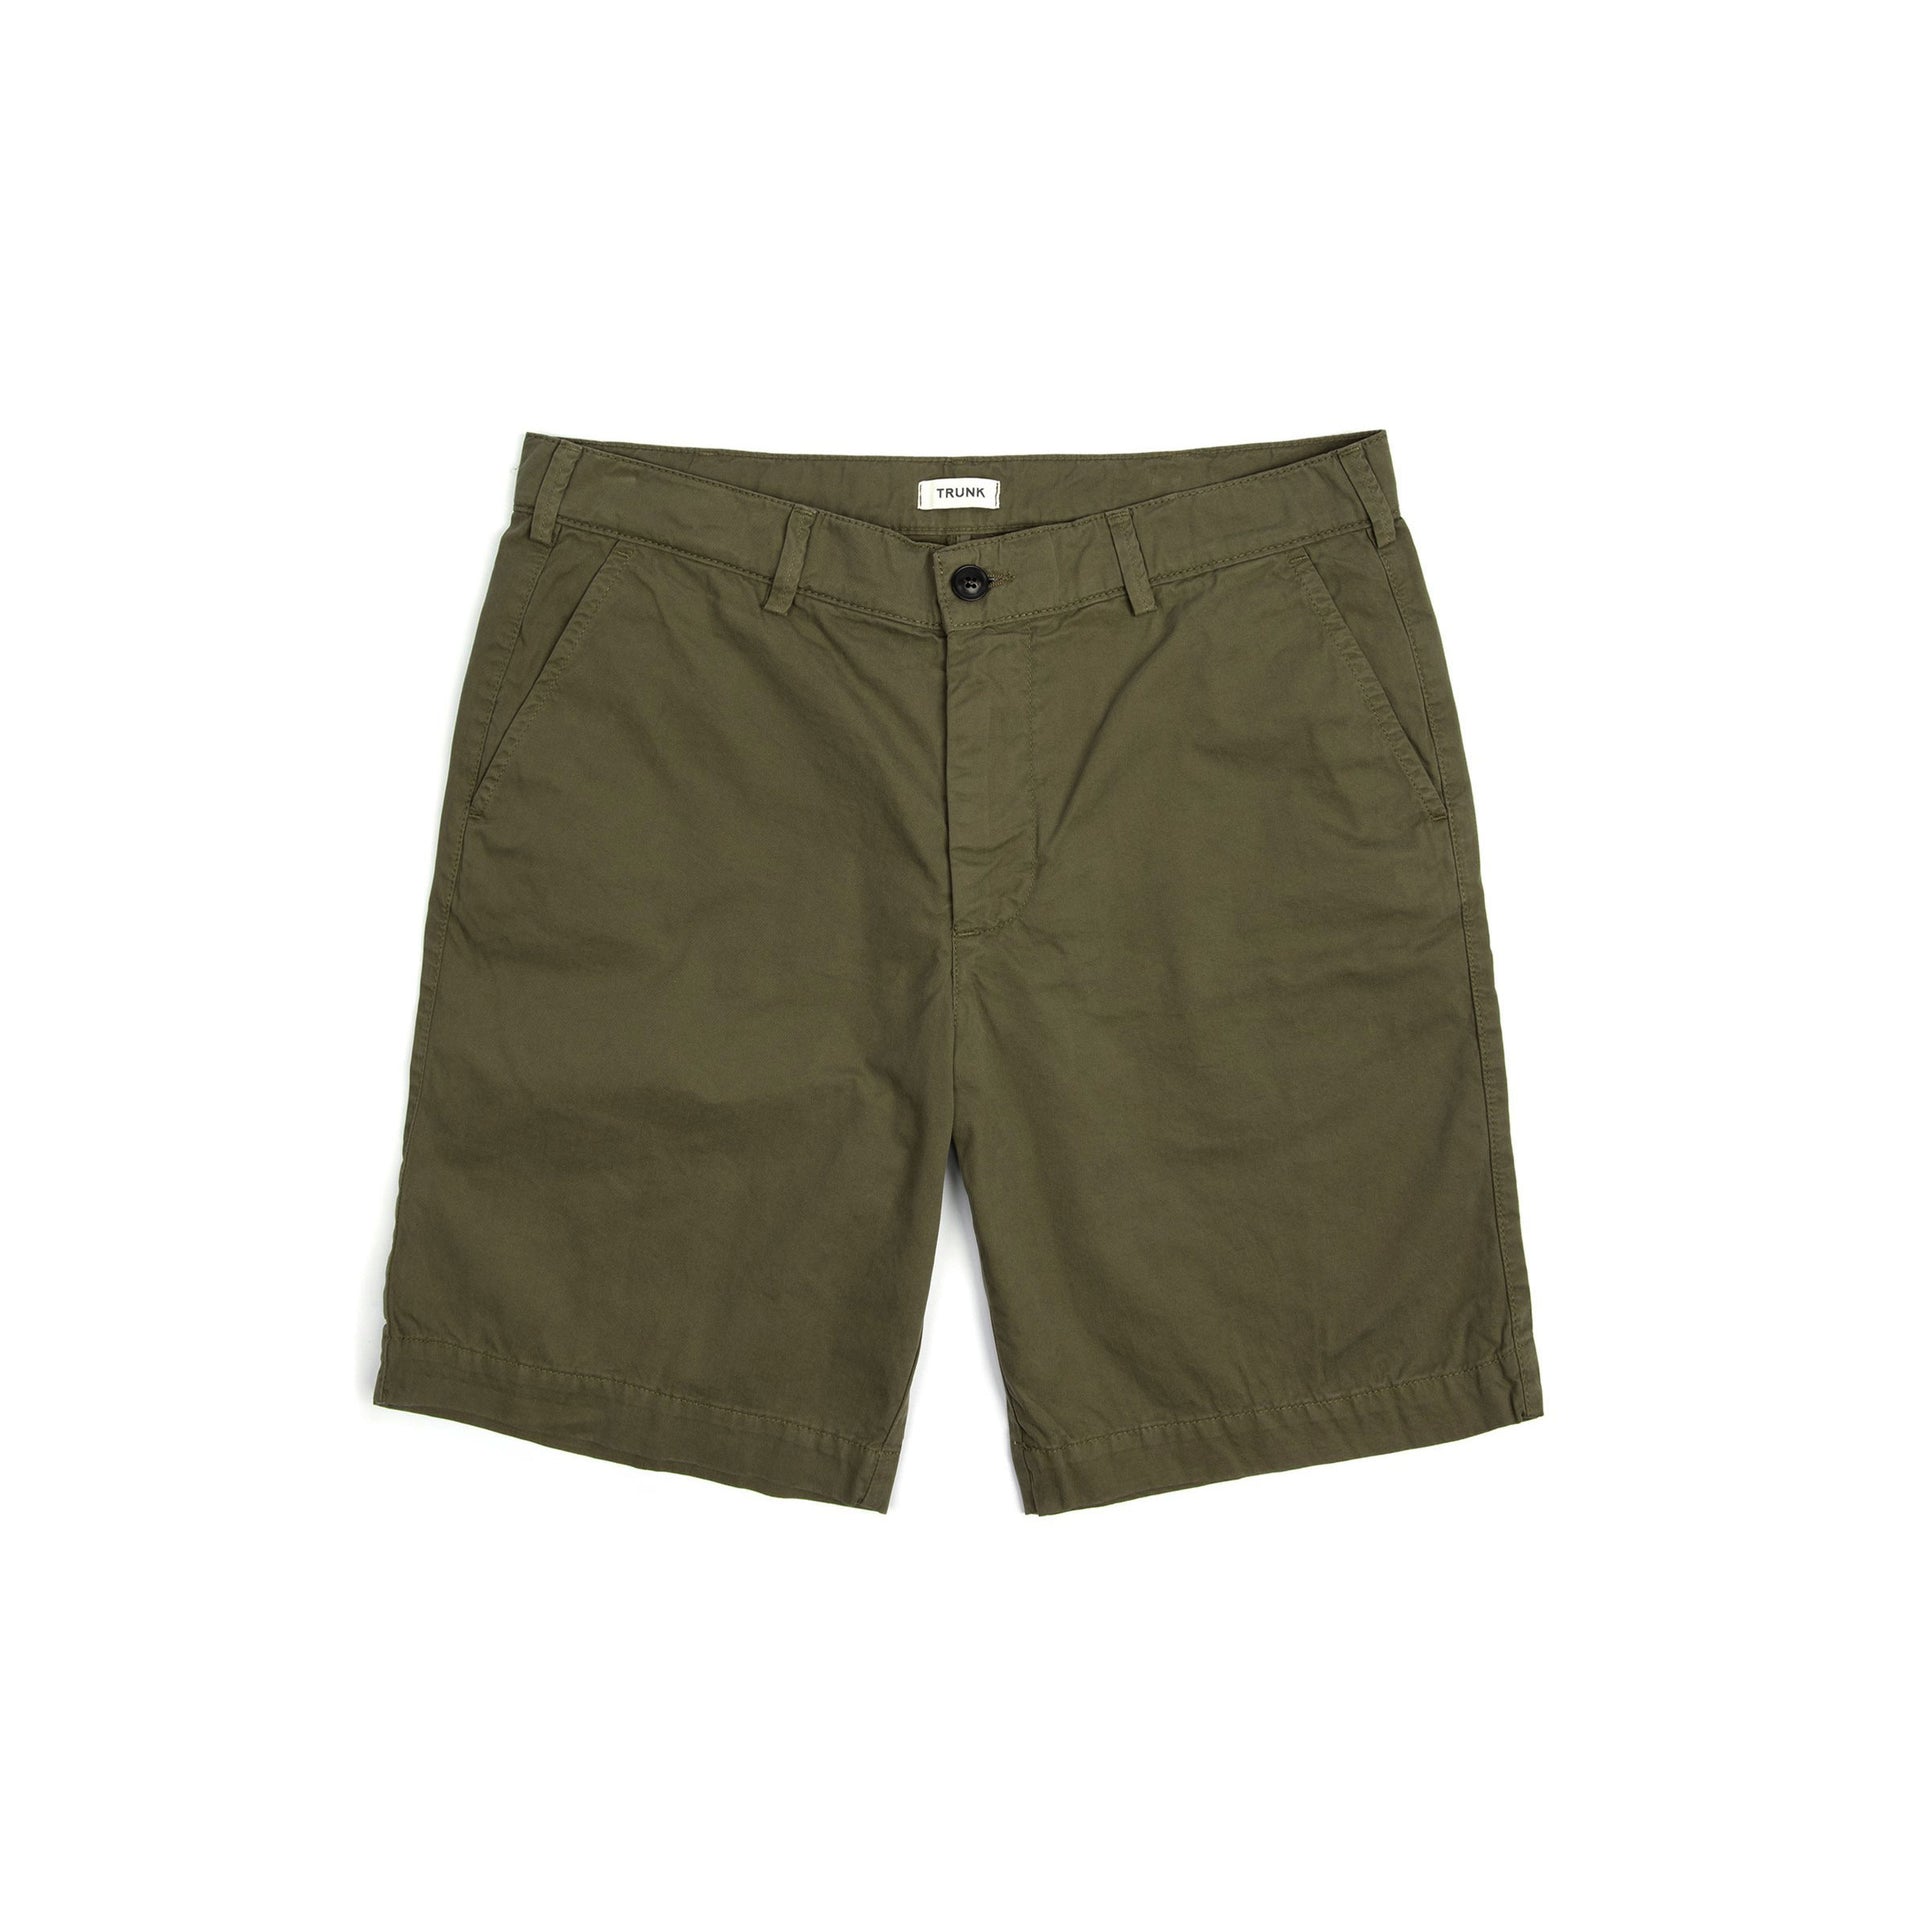 03.

The perfect shorts
...